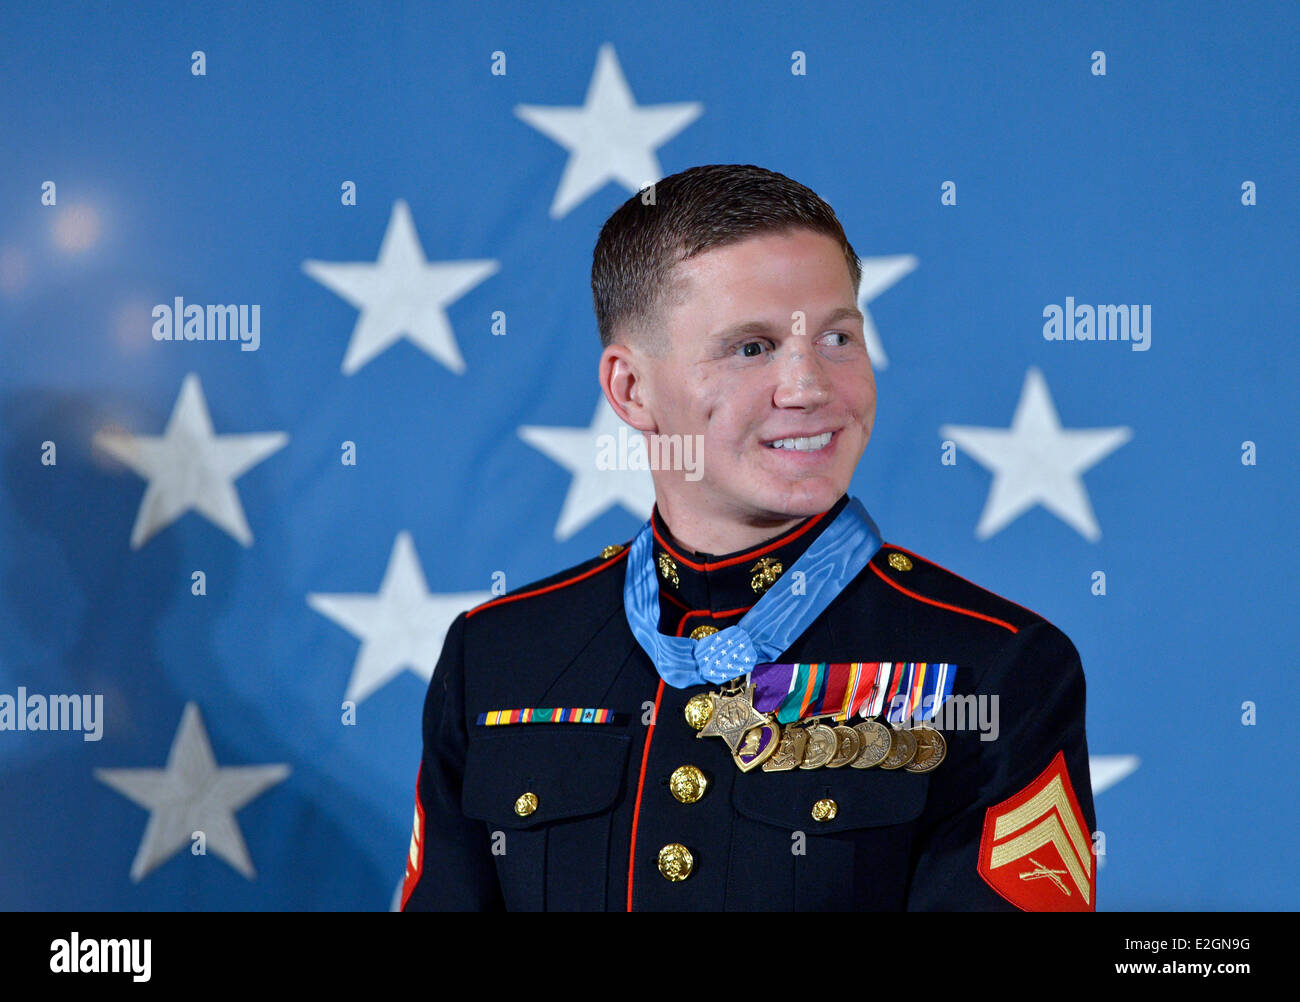 Washington, DC, USA. 19th June, 2014. William 'Kyle' Carpenter receives the Medal of Honor from U.S. President Barack Obama during a ceremony in the East Room of the White House in Washington, DC, the United States, on June 19, 2014. Carpenter received the medal for covering a grenade to save fellow Marines during a Taliban attack in November 2010. Carpenter is the eighth living recipient chosen for the highest military award. Credit:  Yin Bogu/Xinhua/Alamy Live News Stock Photo